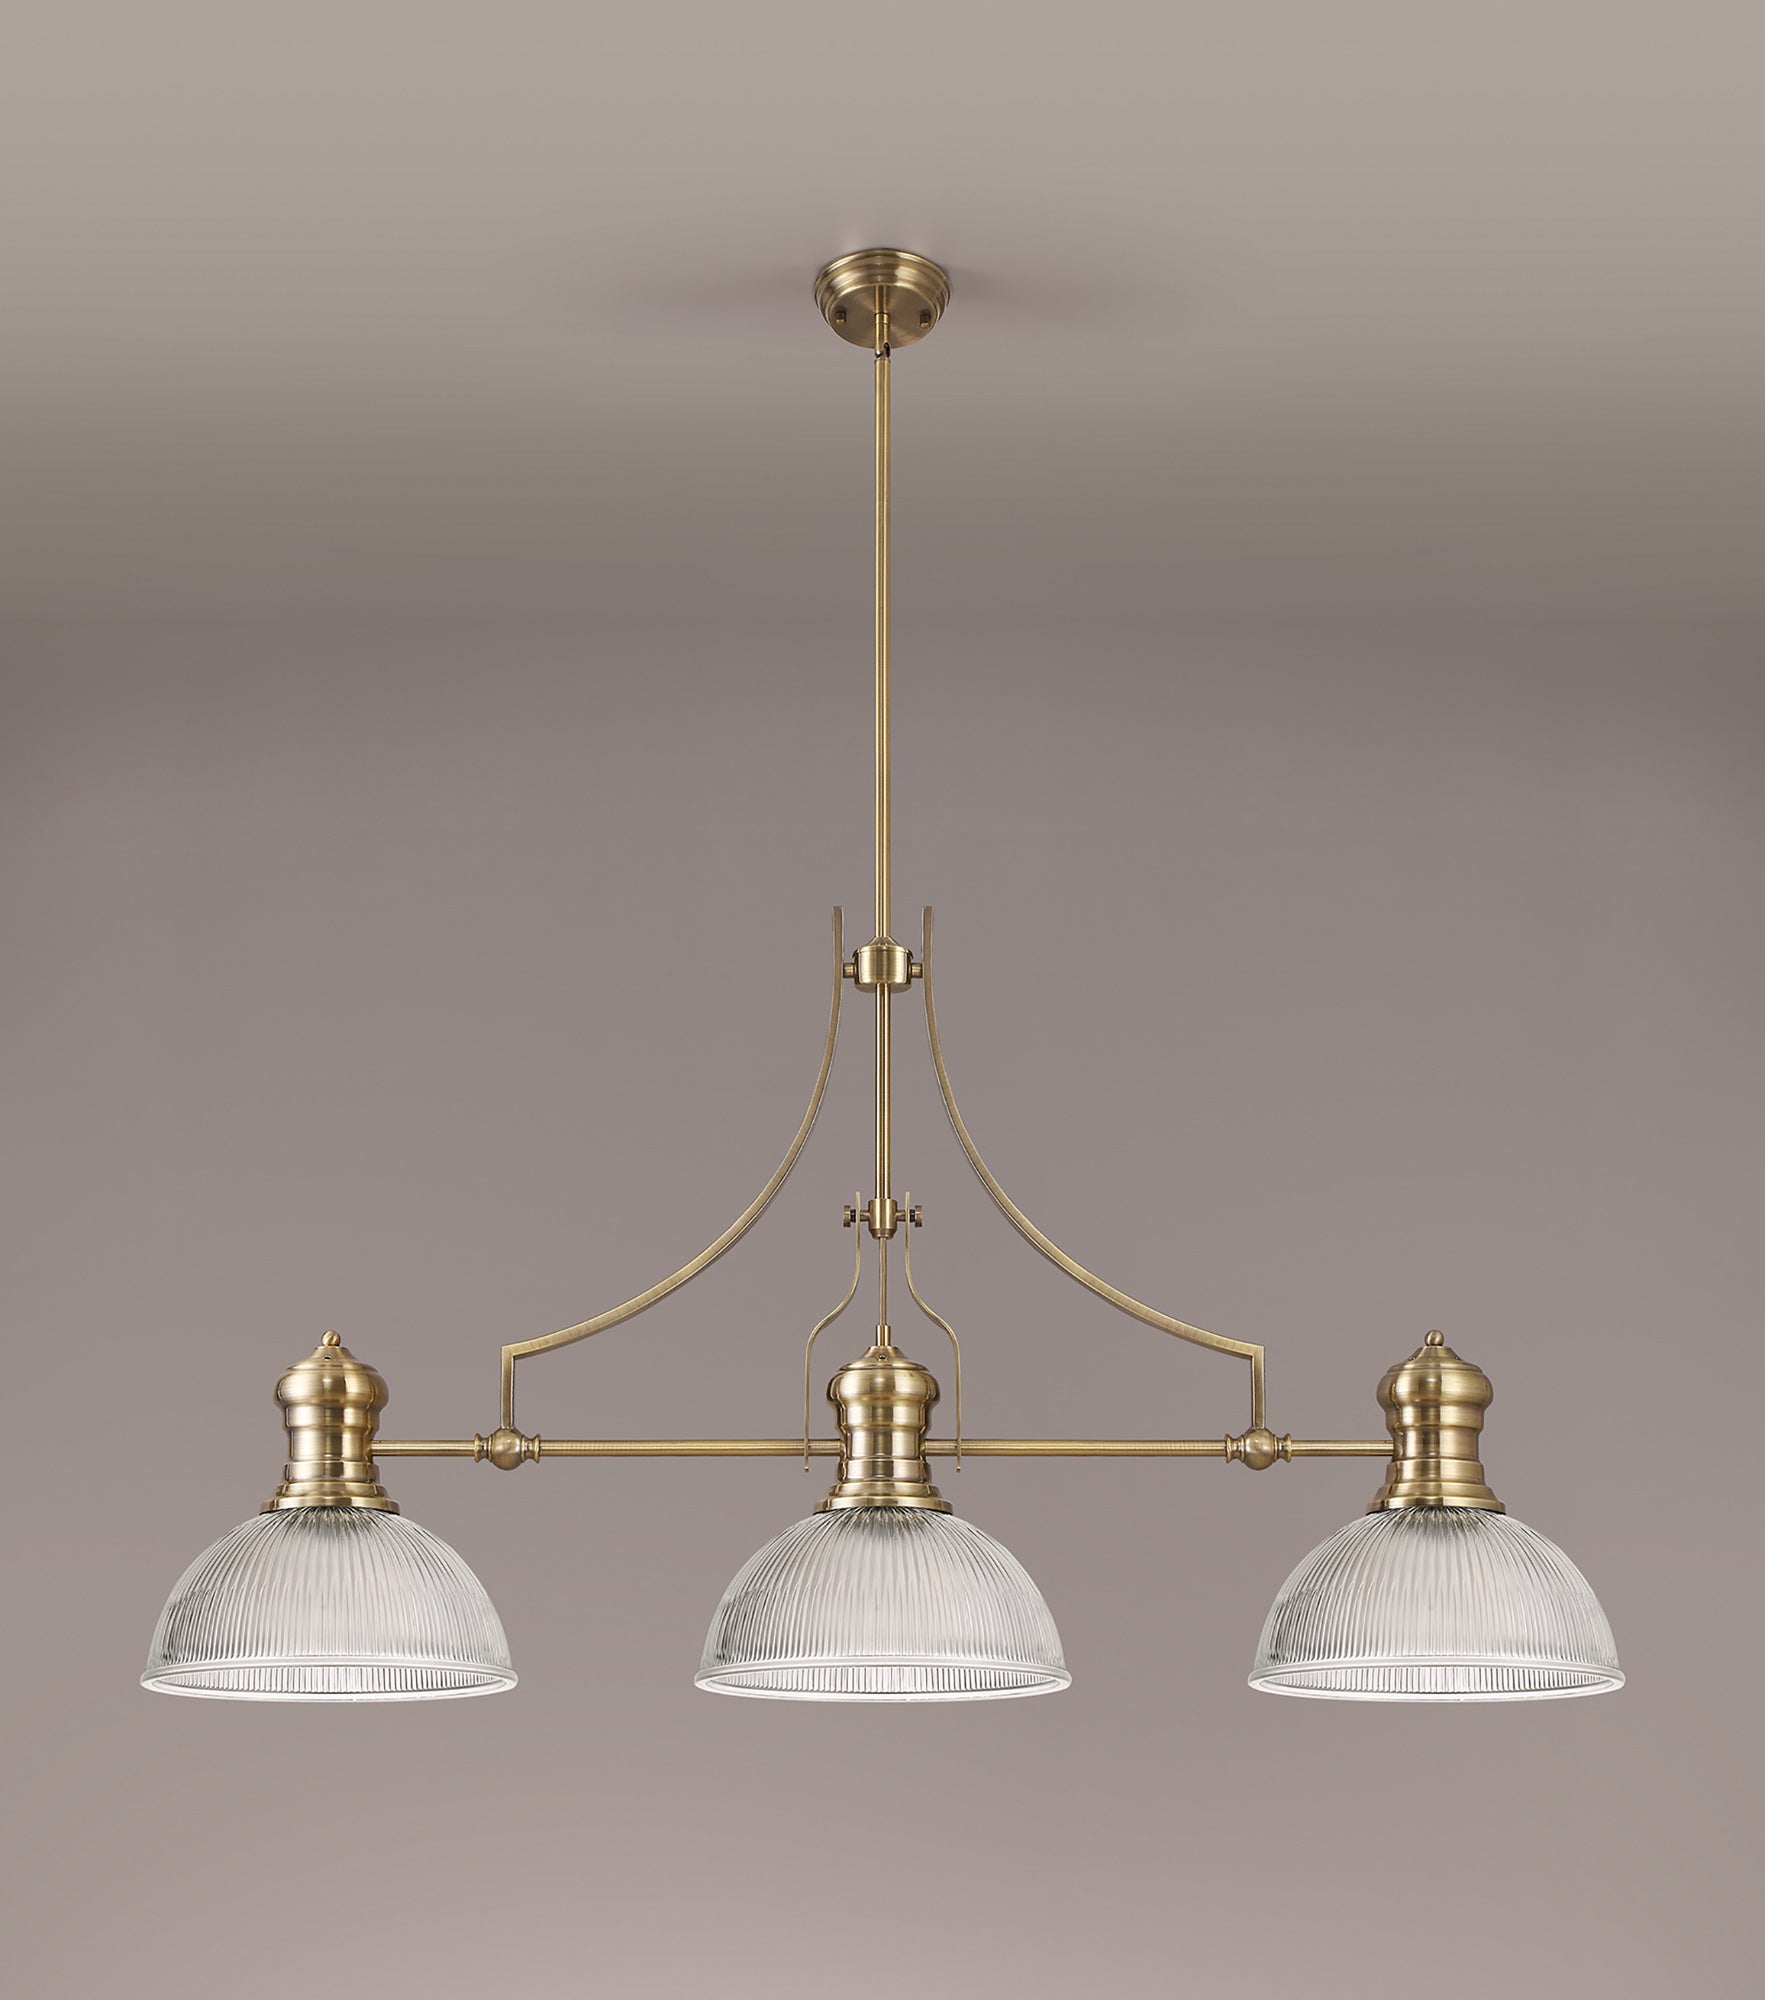 Docker 3 Light Linear Pendant E27 With 30cm Dome Glass Shade, Antique Brass, Clear